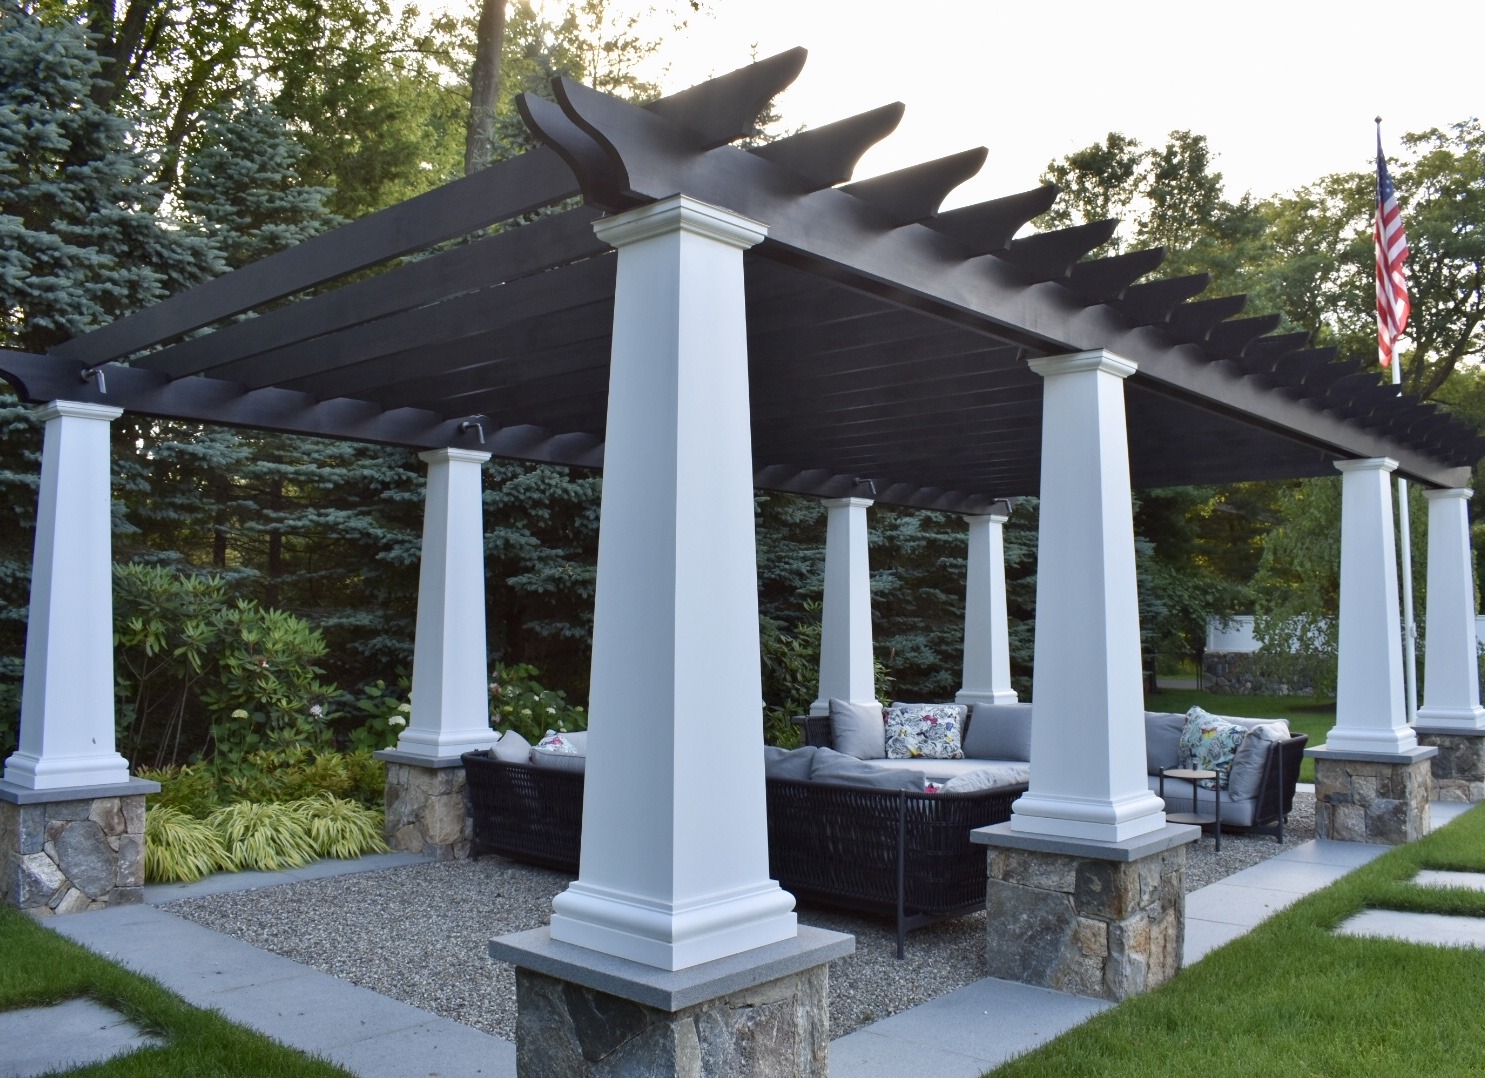 An outdoor pergola with white columns and black roof slats over a seating area, surrounded by landscaped greenery and an American flag visible.